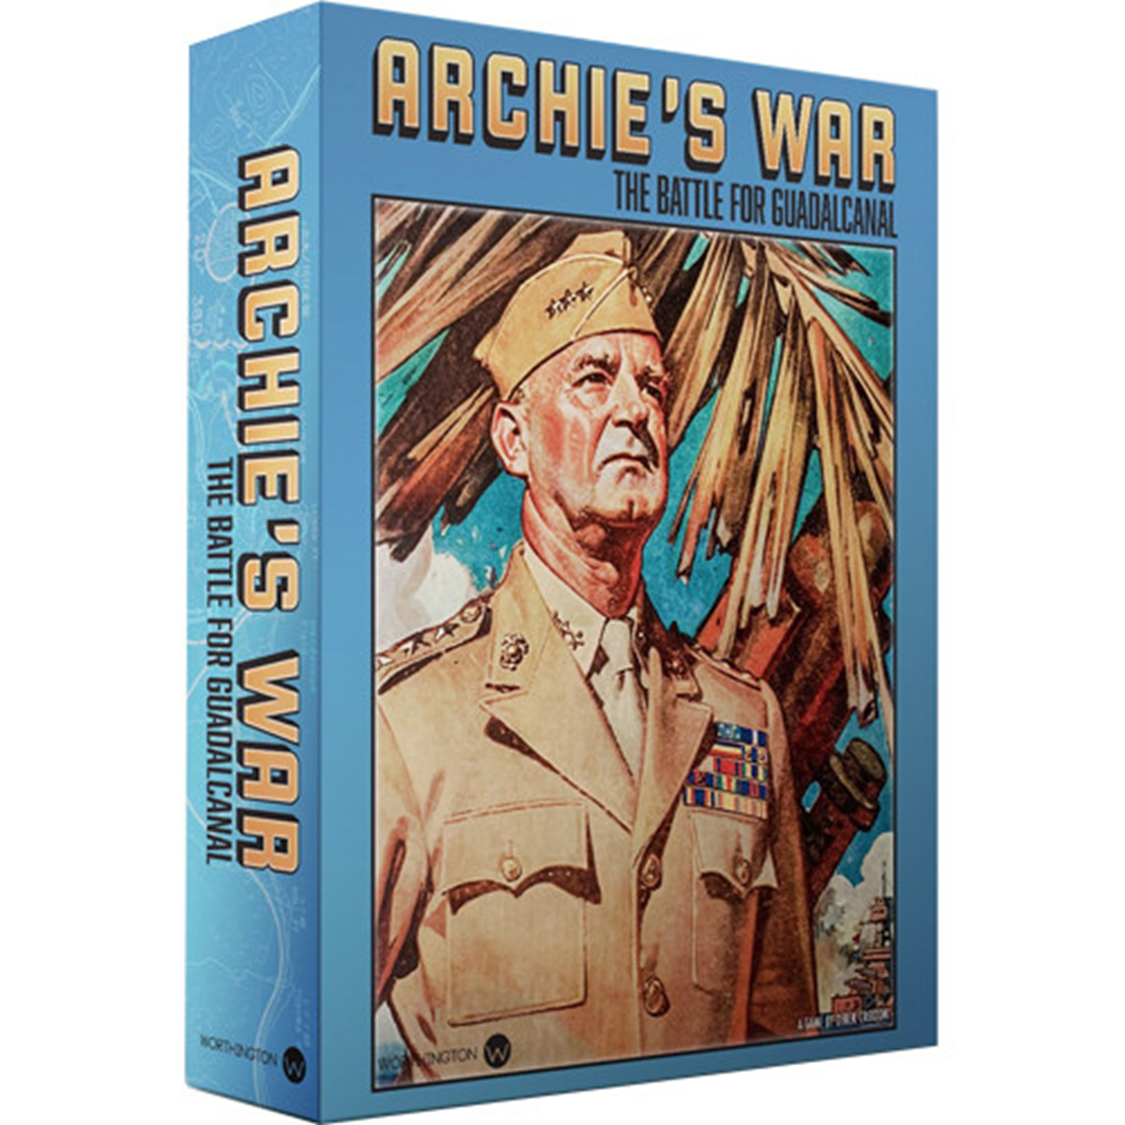 Archie's War: The Battle for Guadalcanal